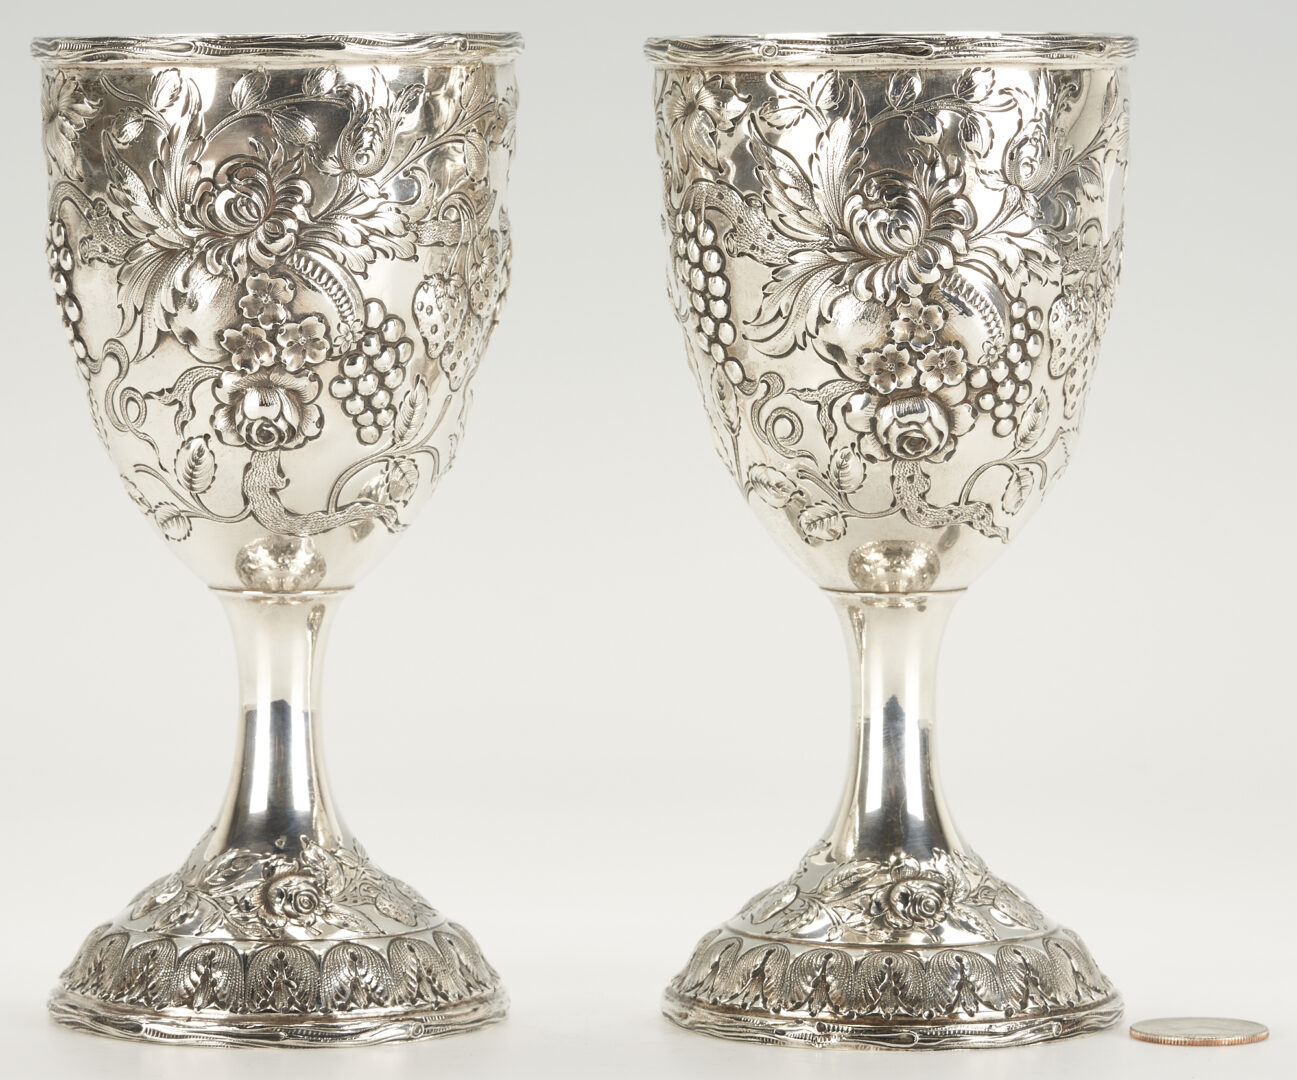 Lot 935: 2 Sterling Silver Repousse Water Goblets by Baltimore Silversmiths Mfg. Co.